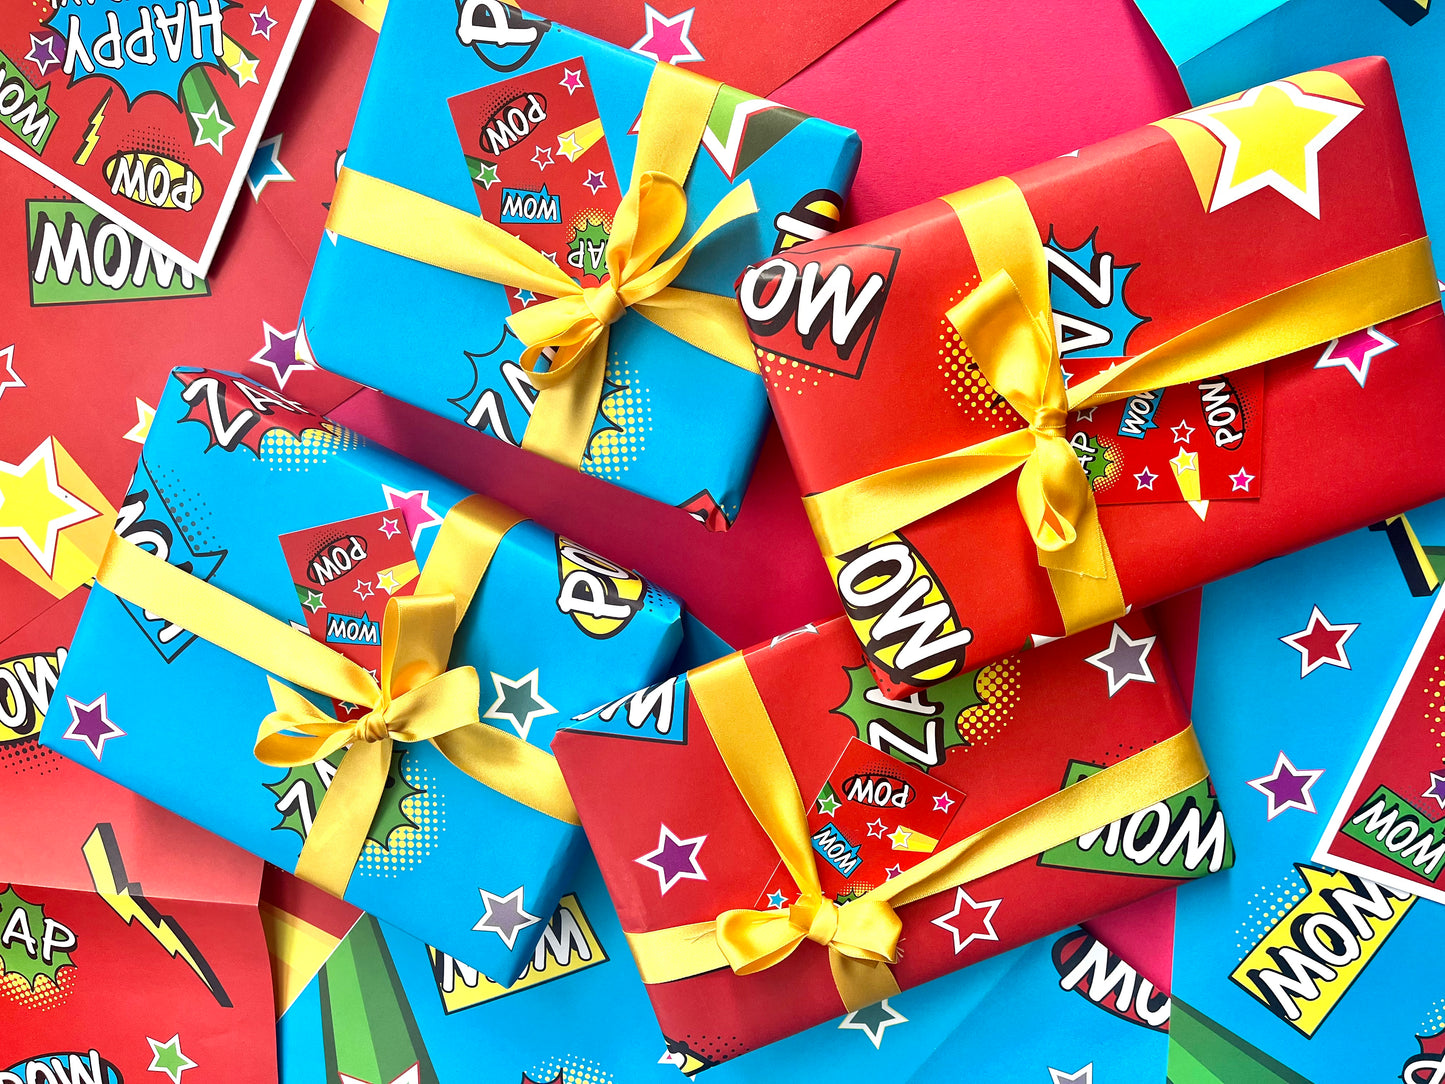 Blue Pop Art Wrapping Paper and Tags